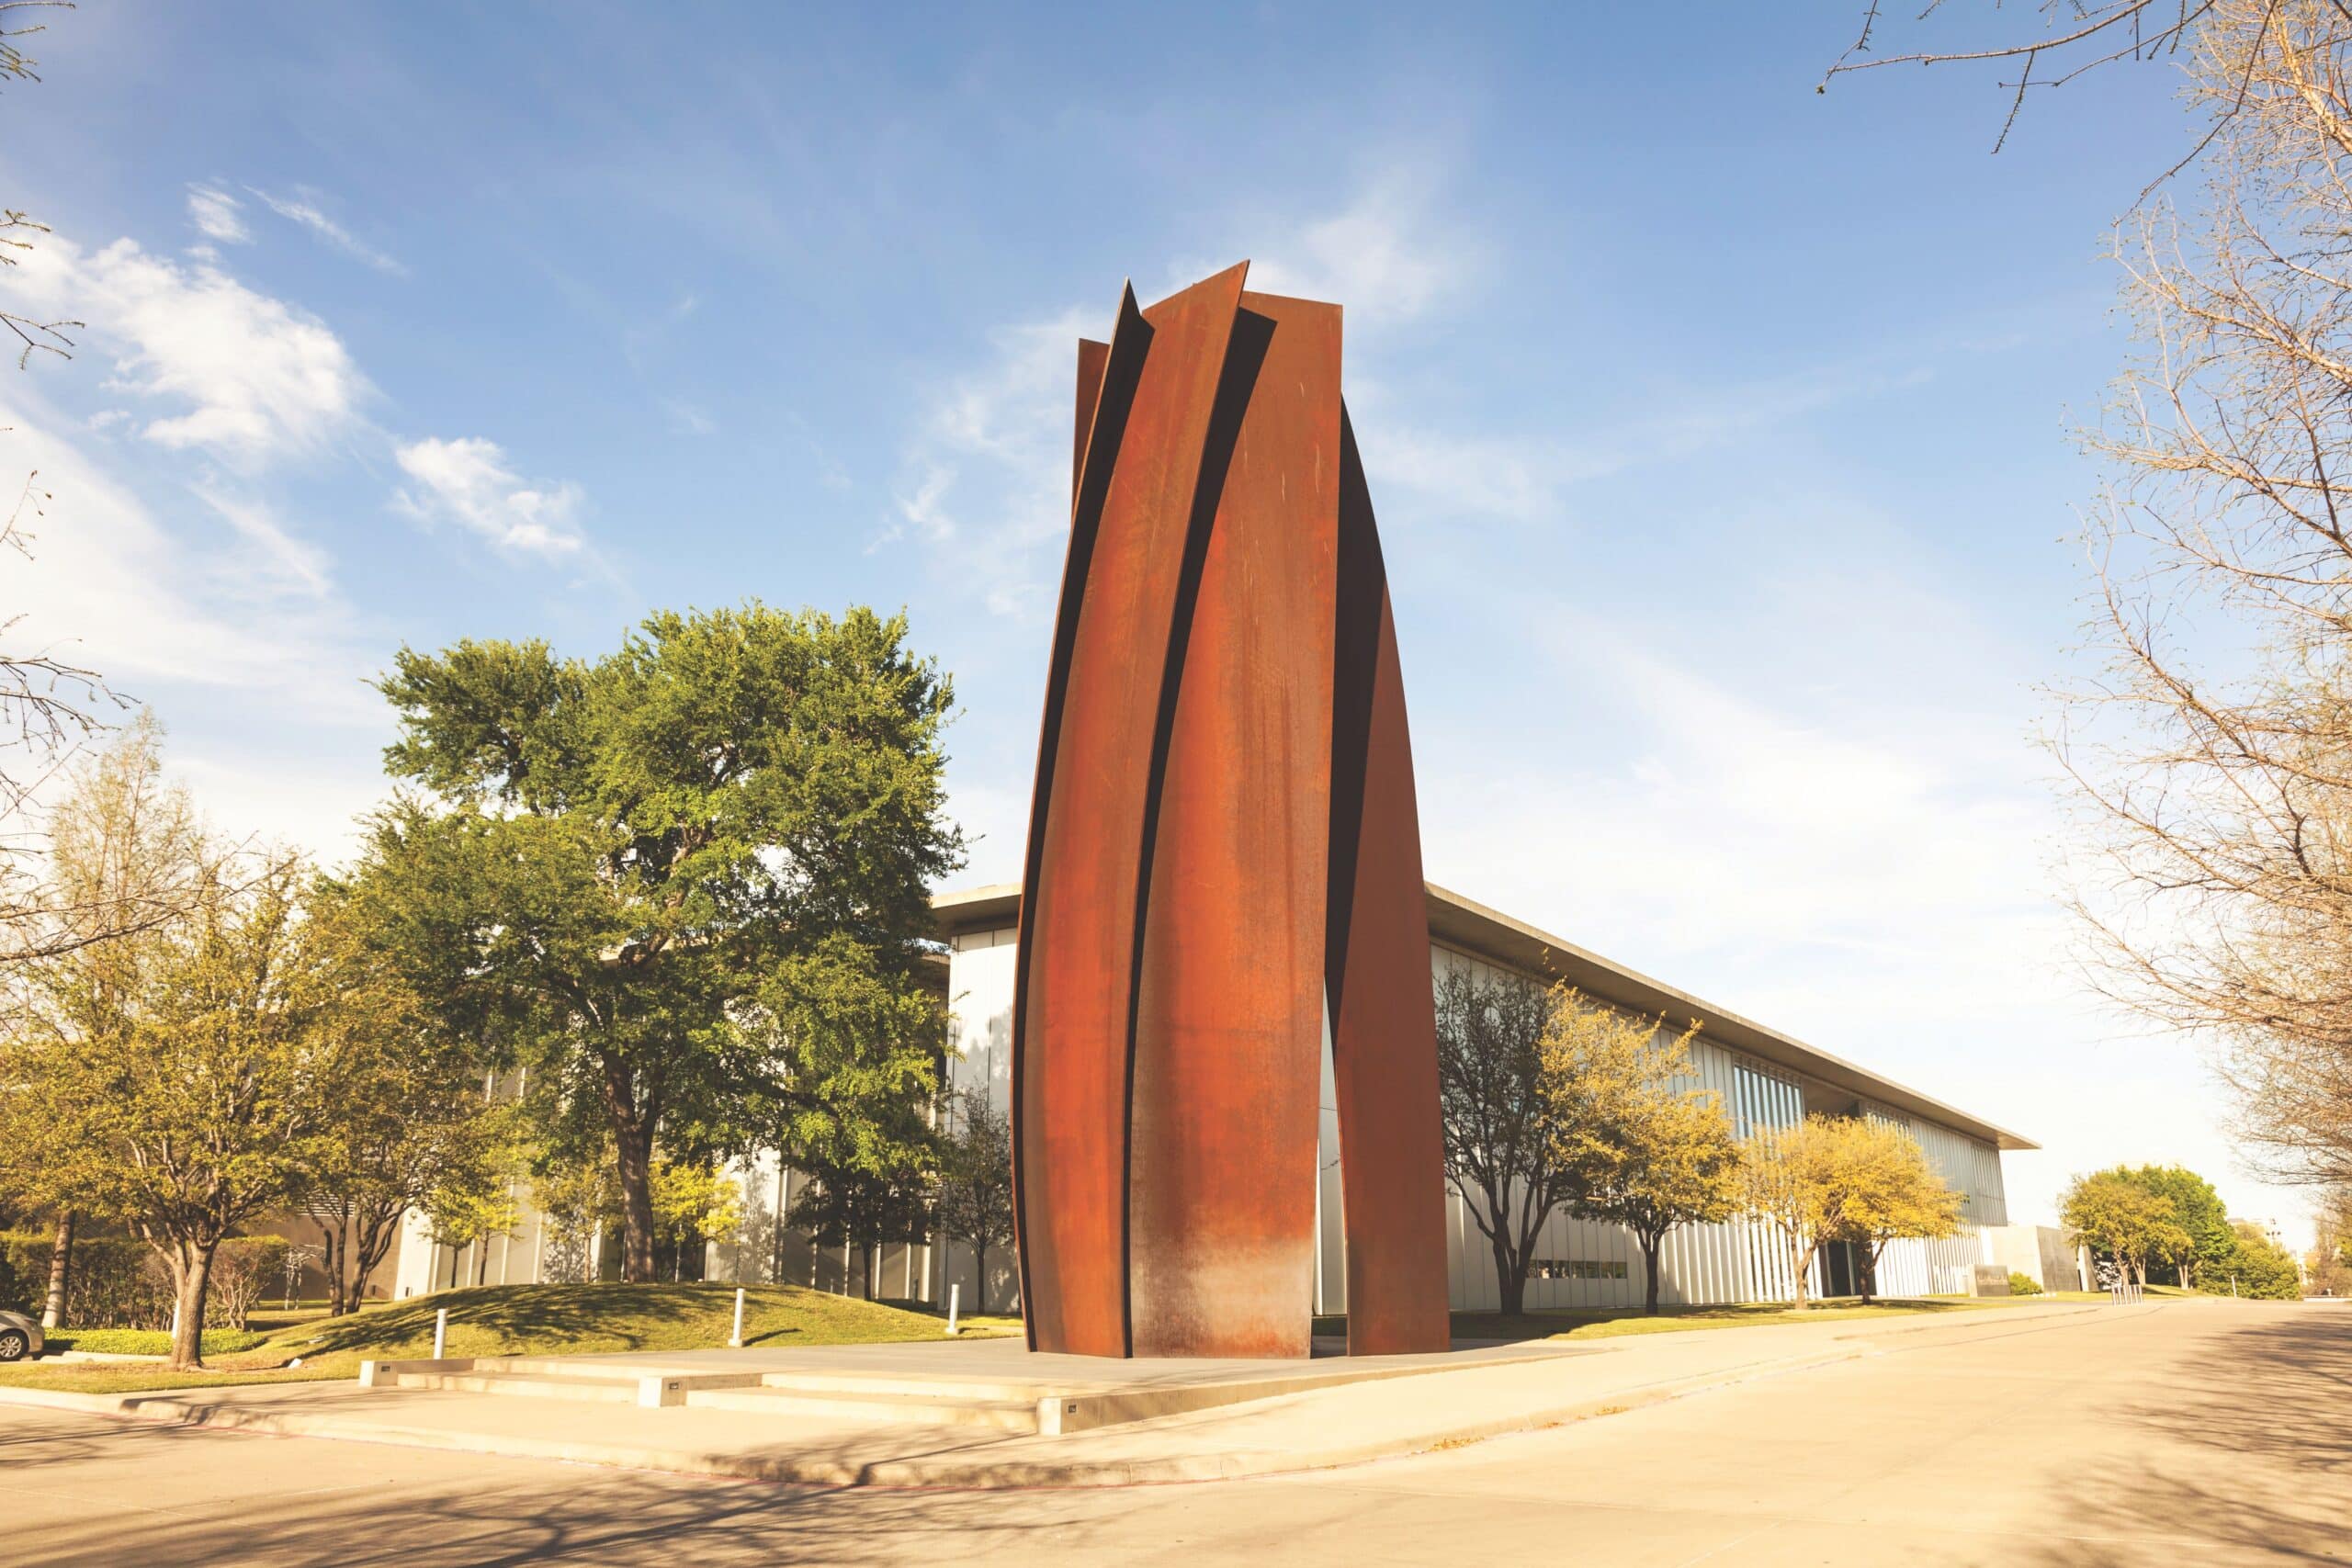 The exterior of the Modern Art Museum of Fort Worth